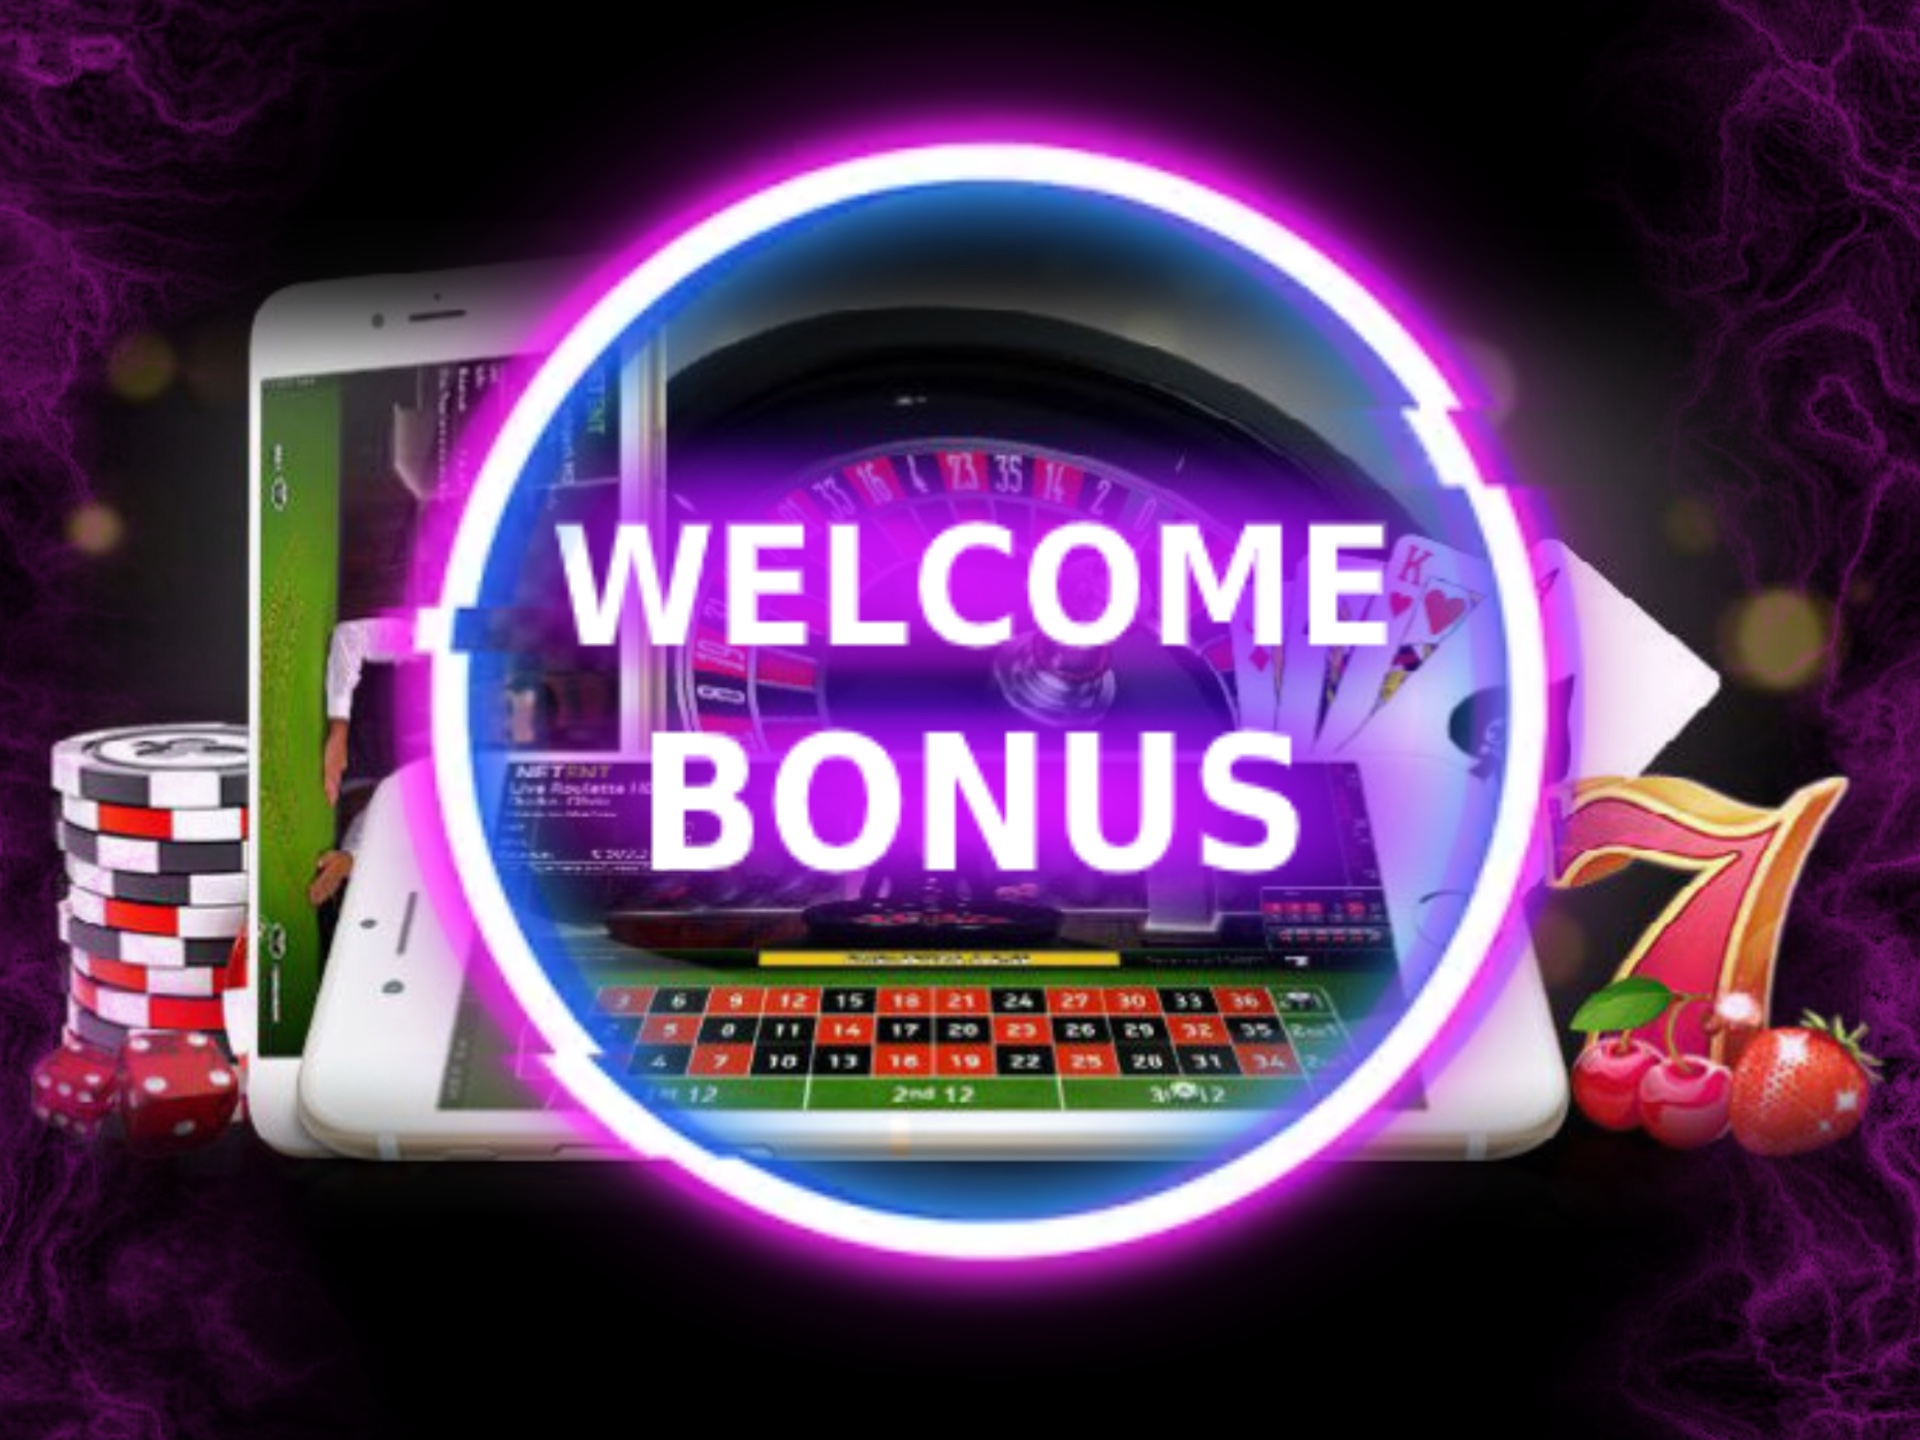 If you are new to an online casino, you get a welcome bonus from it for registering via mobile app.